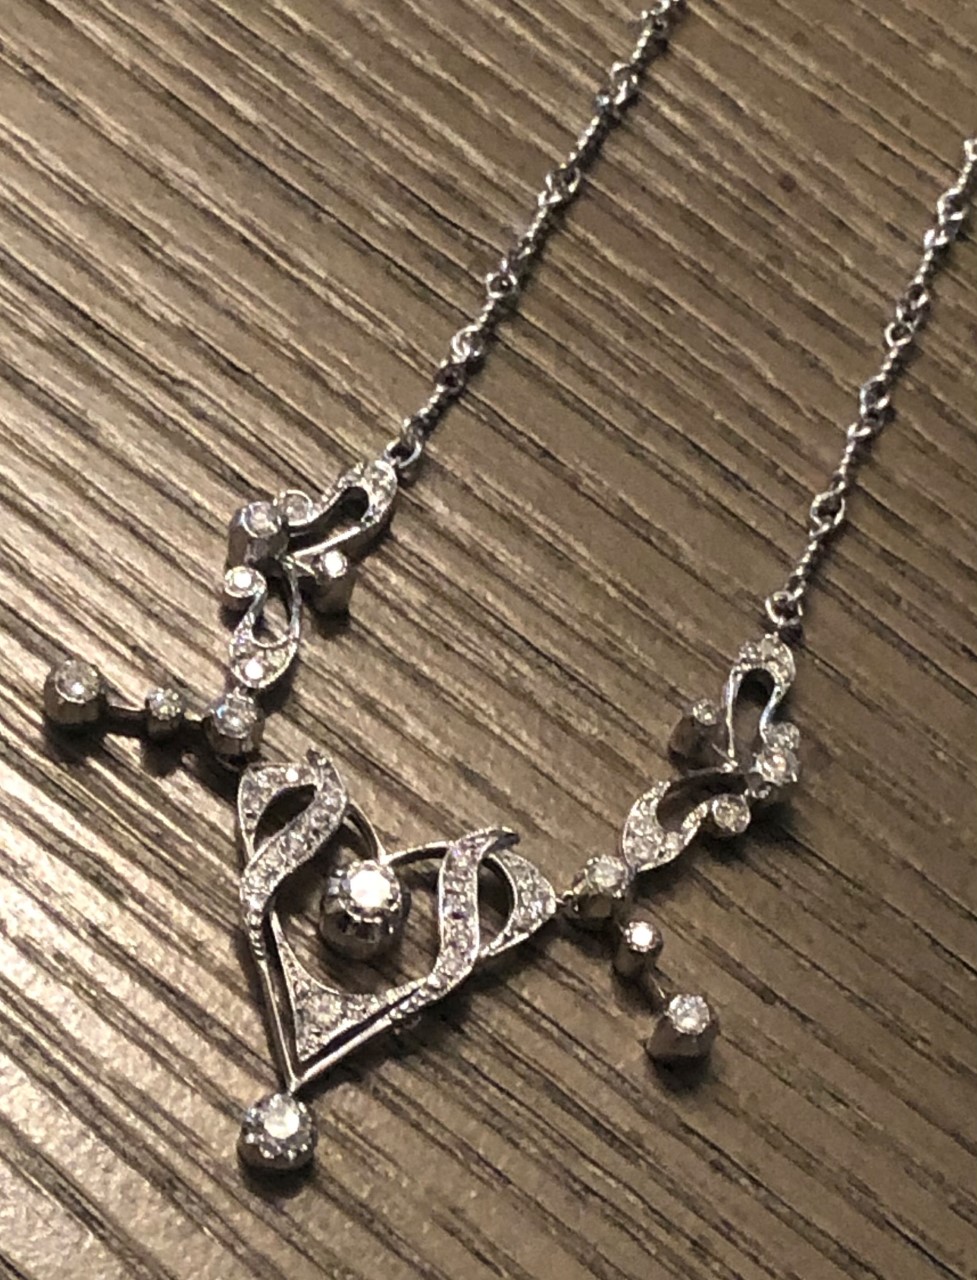 White Gold Diamond Necklace Buyer Collectors Coins & Jewelry Lynbrook (516)341-7355